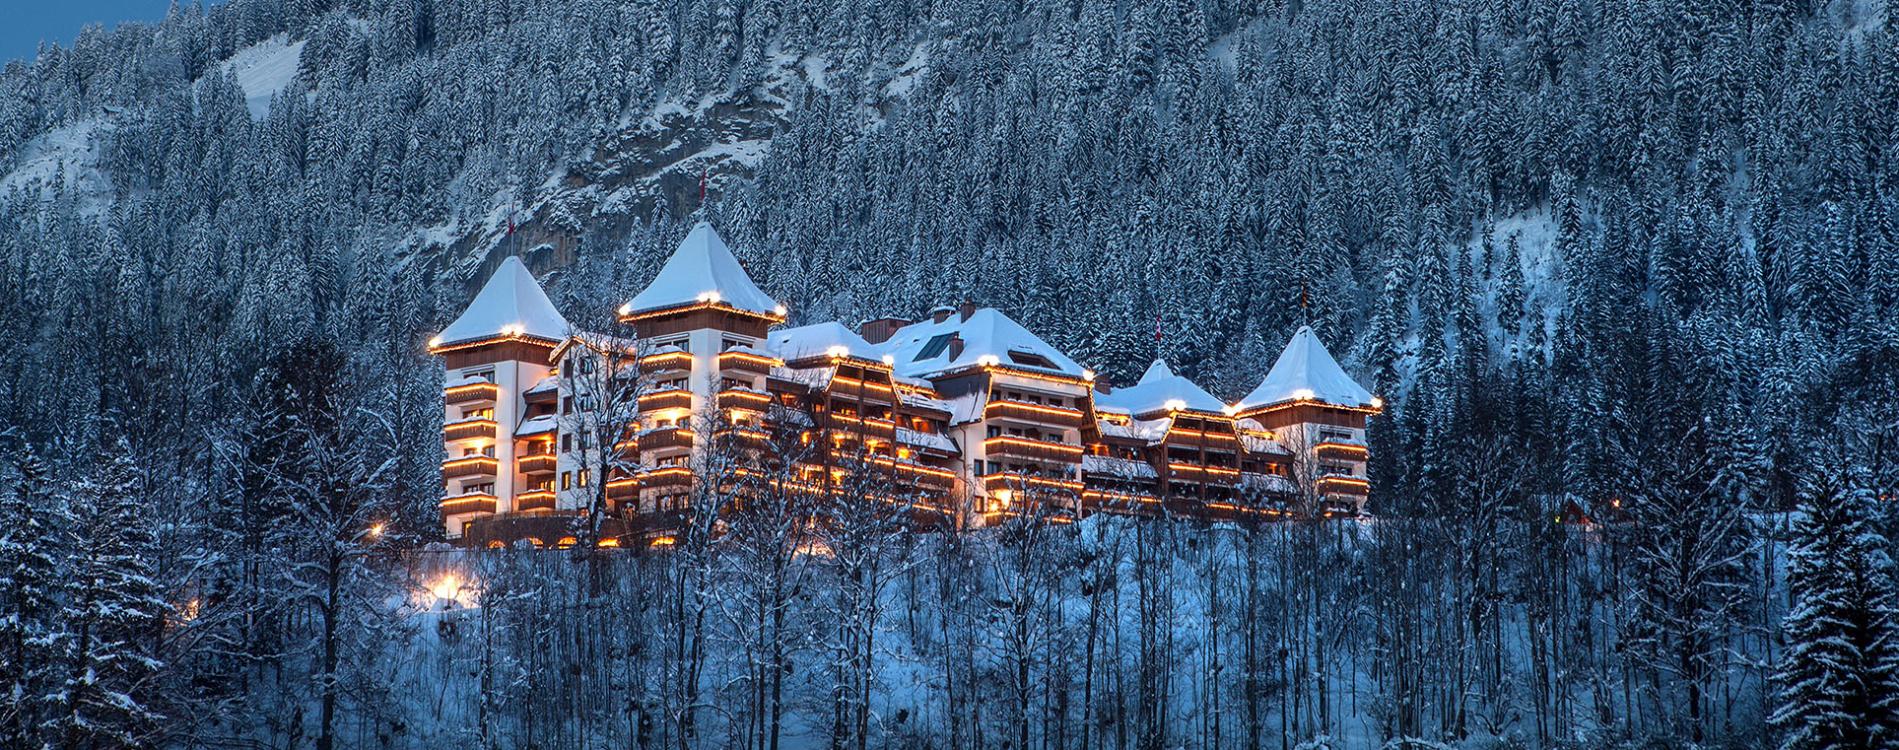 The Alpina Gstaad Exterior at Dusk